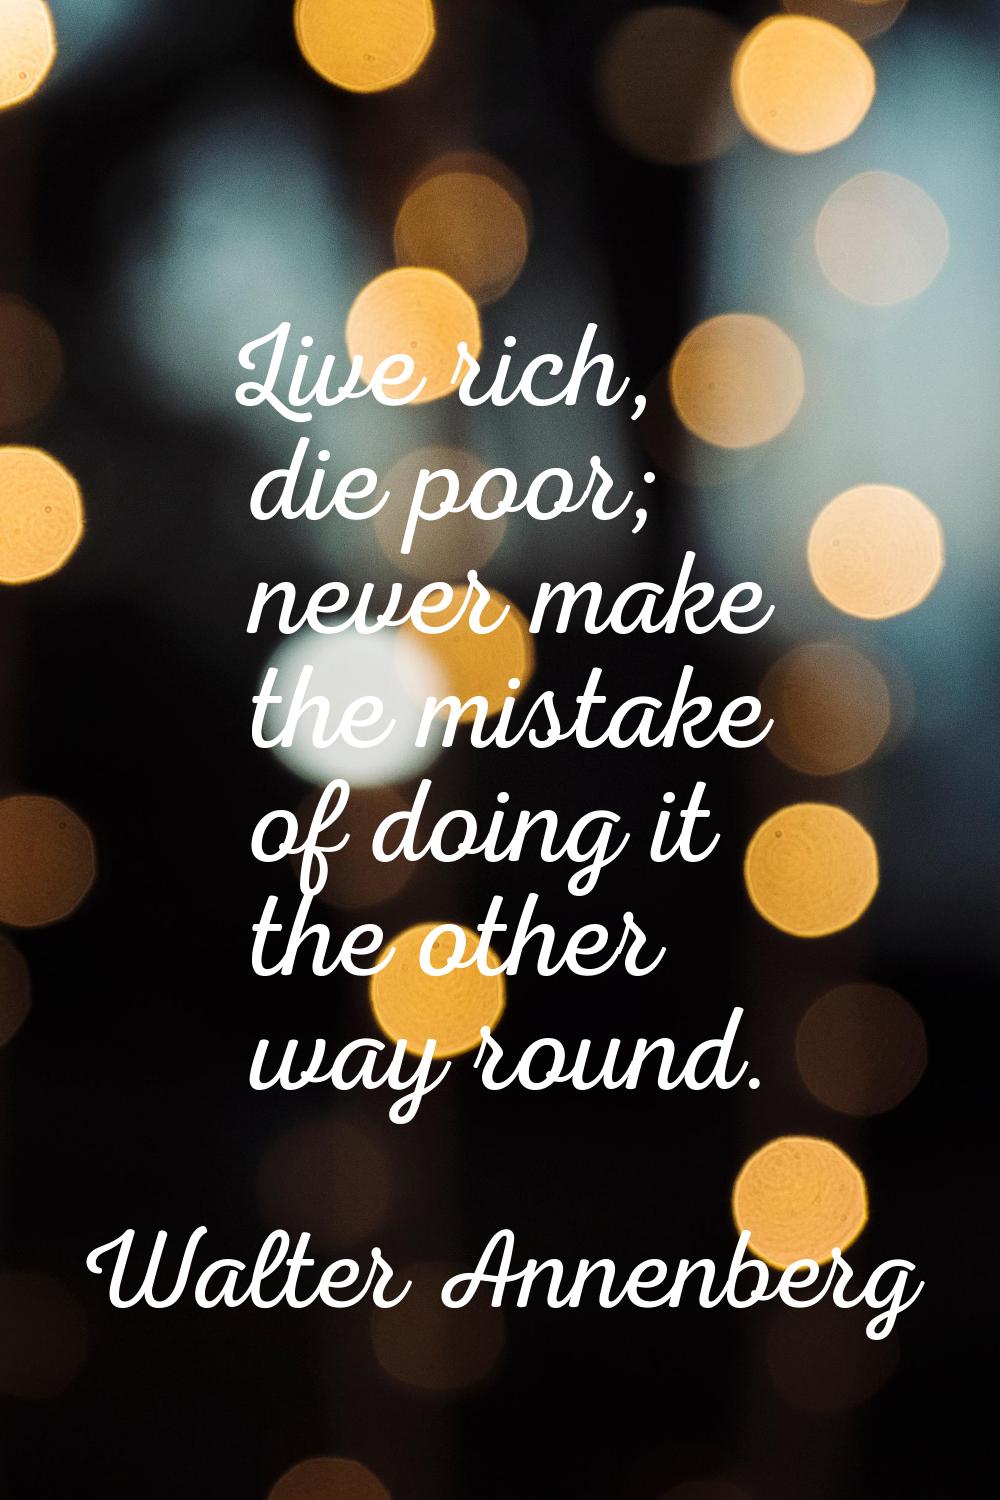 Live rich, die poor; never make the mistake of doing it the other way round.